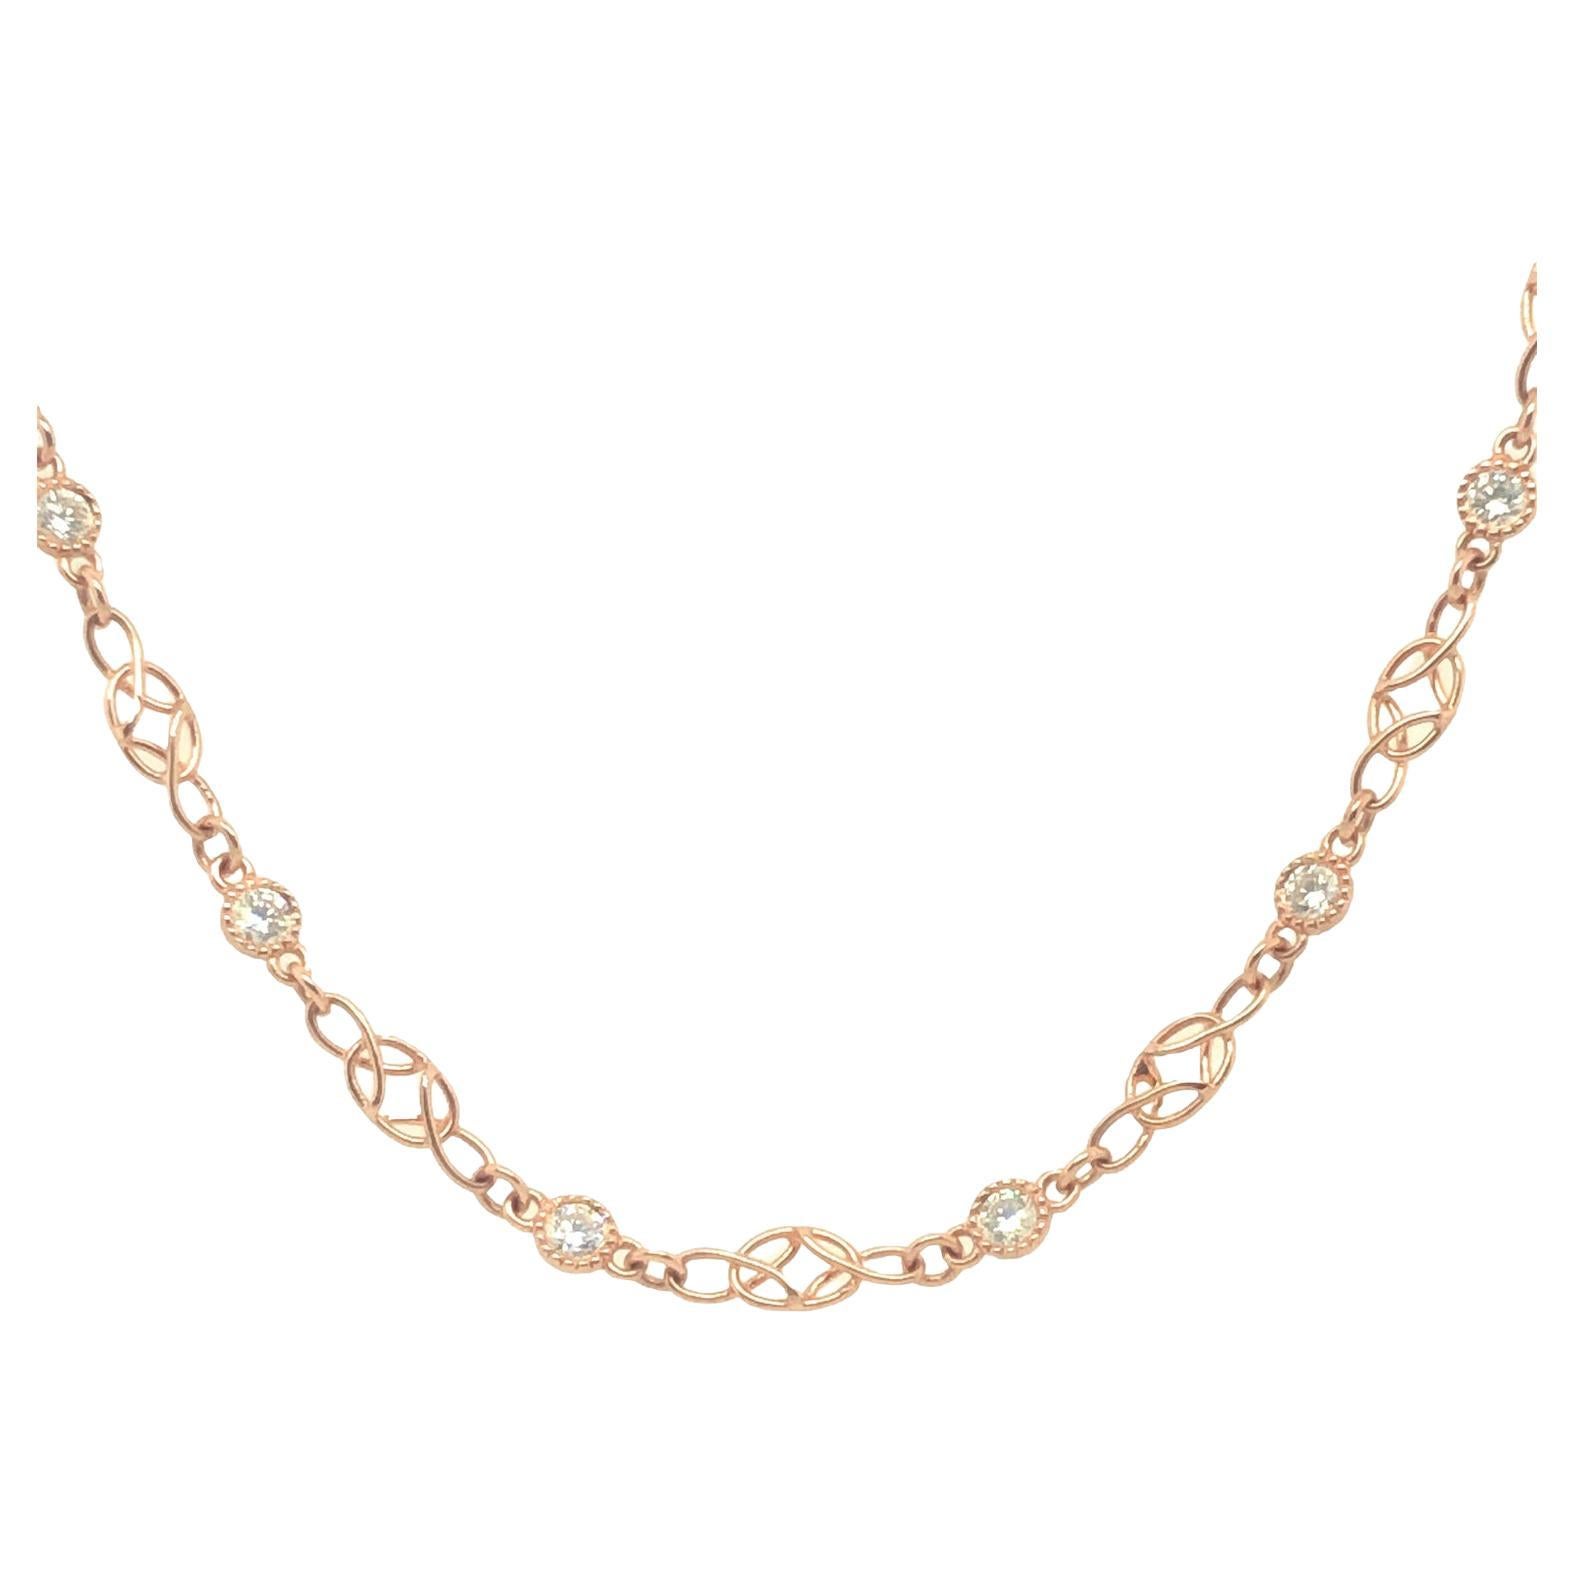 Gems Are Forever Antique Style 1.44 Ct Diamond Link Chain Necklace 18K Rose Gold